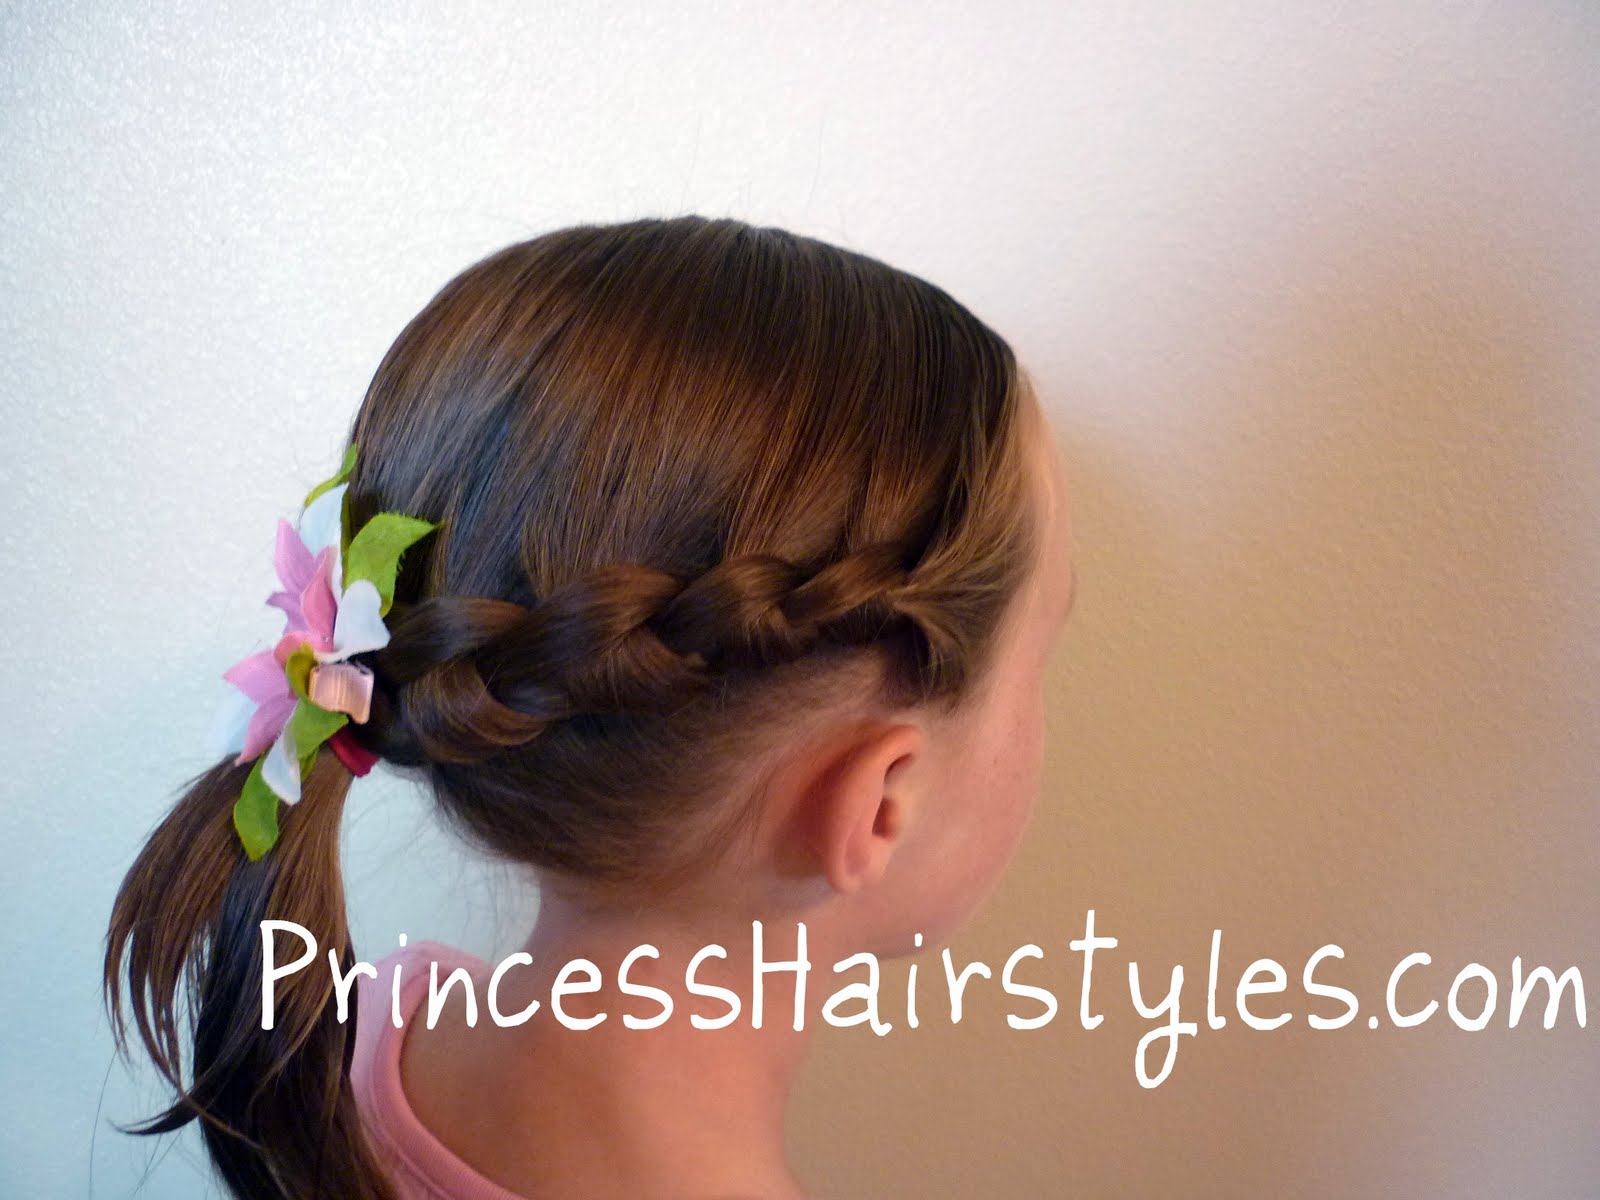 Knotted Braid Hairstyle | Hairstyles For Girls - Princess Hairstyles